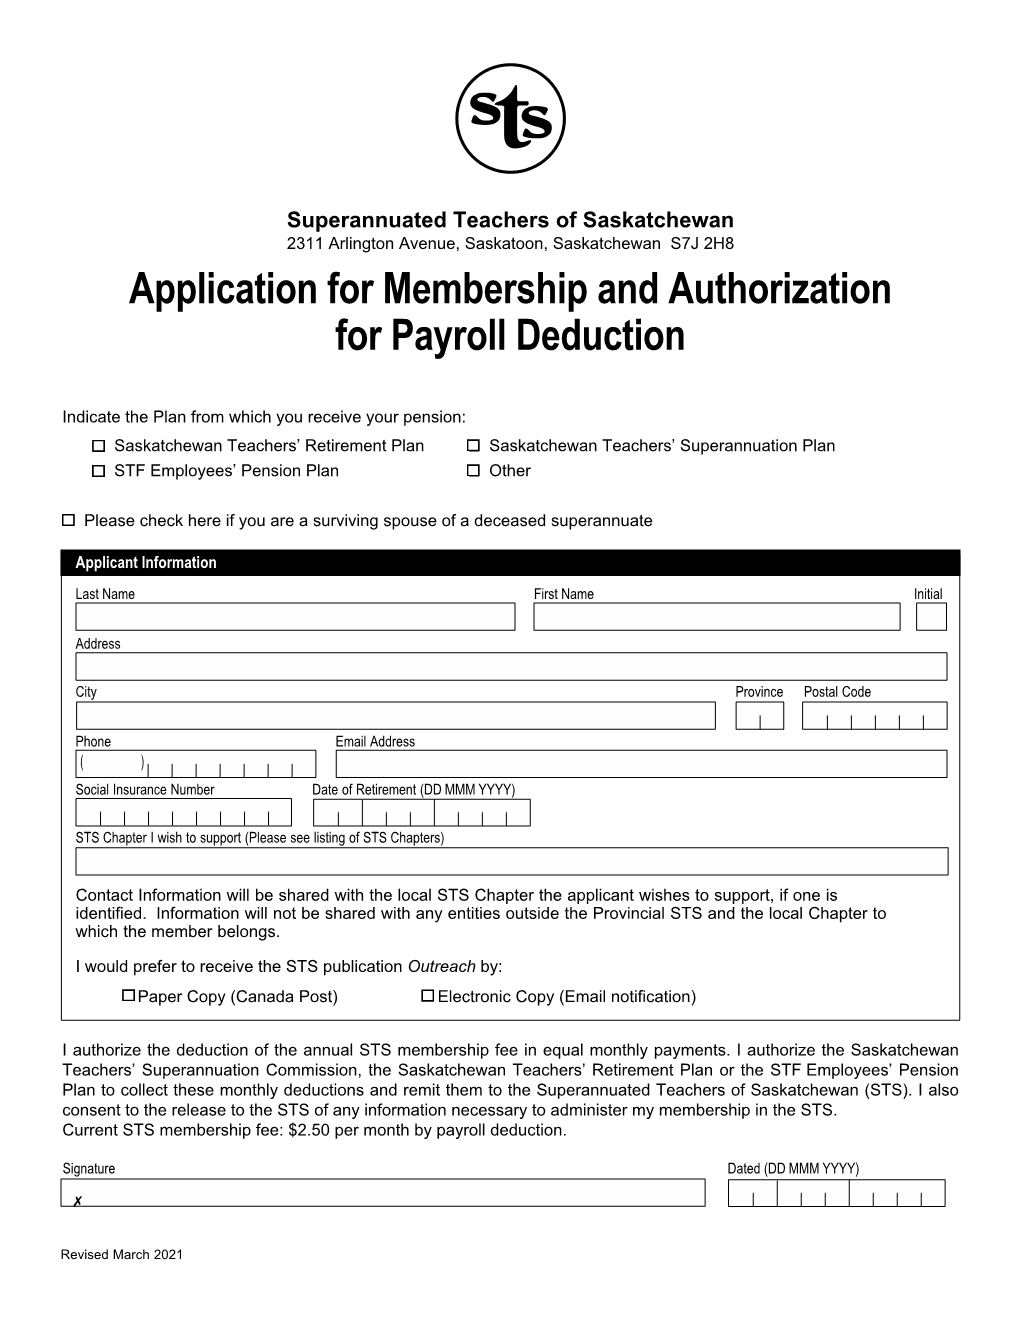 Application for Membership and Authorization for Payroll Deduction